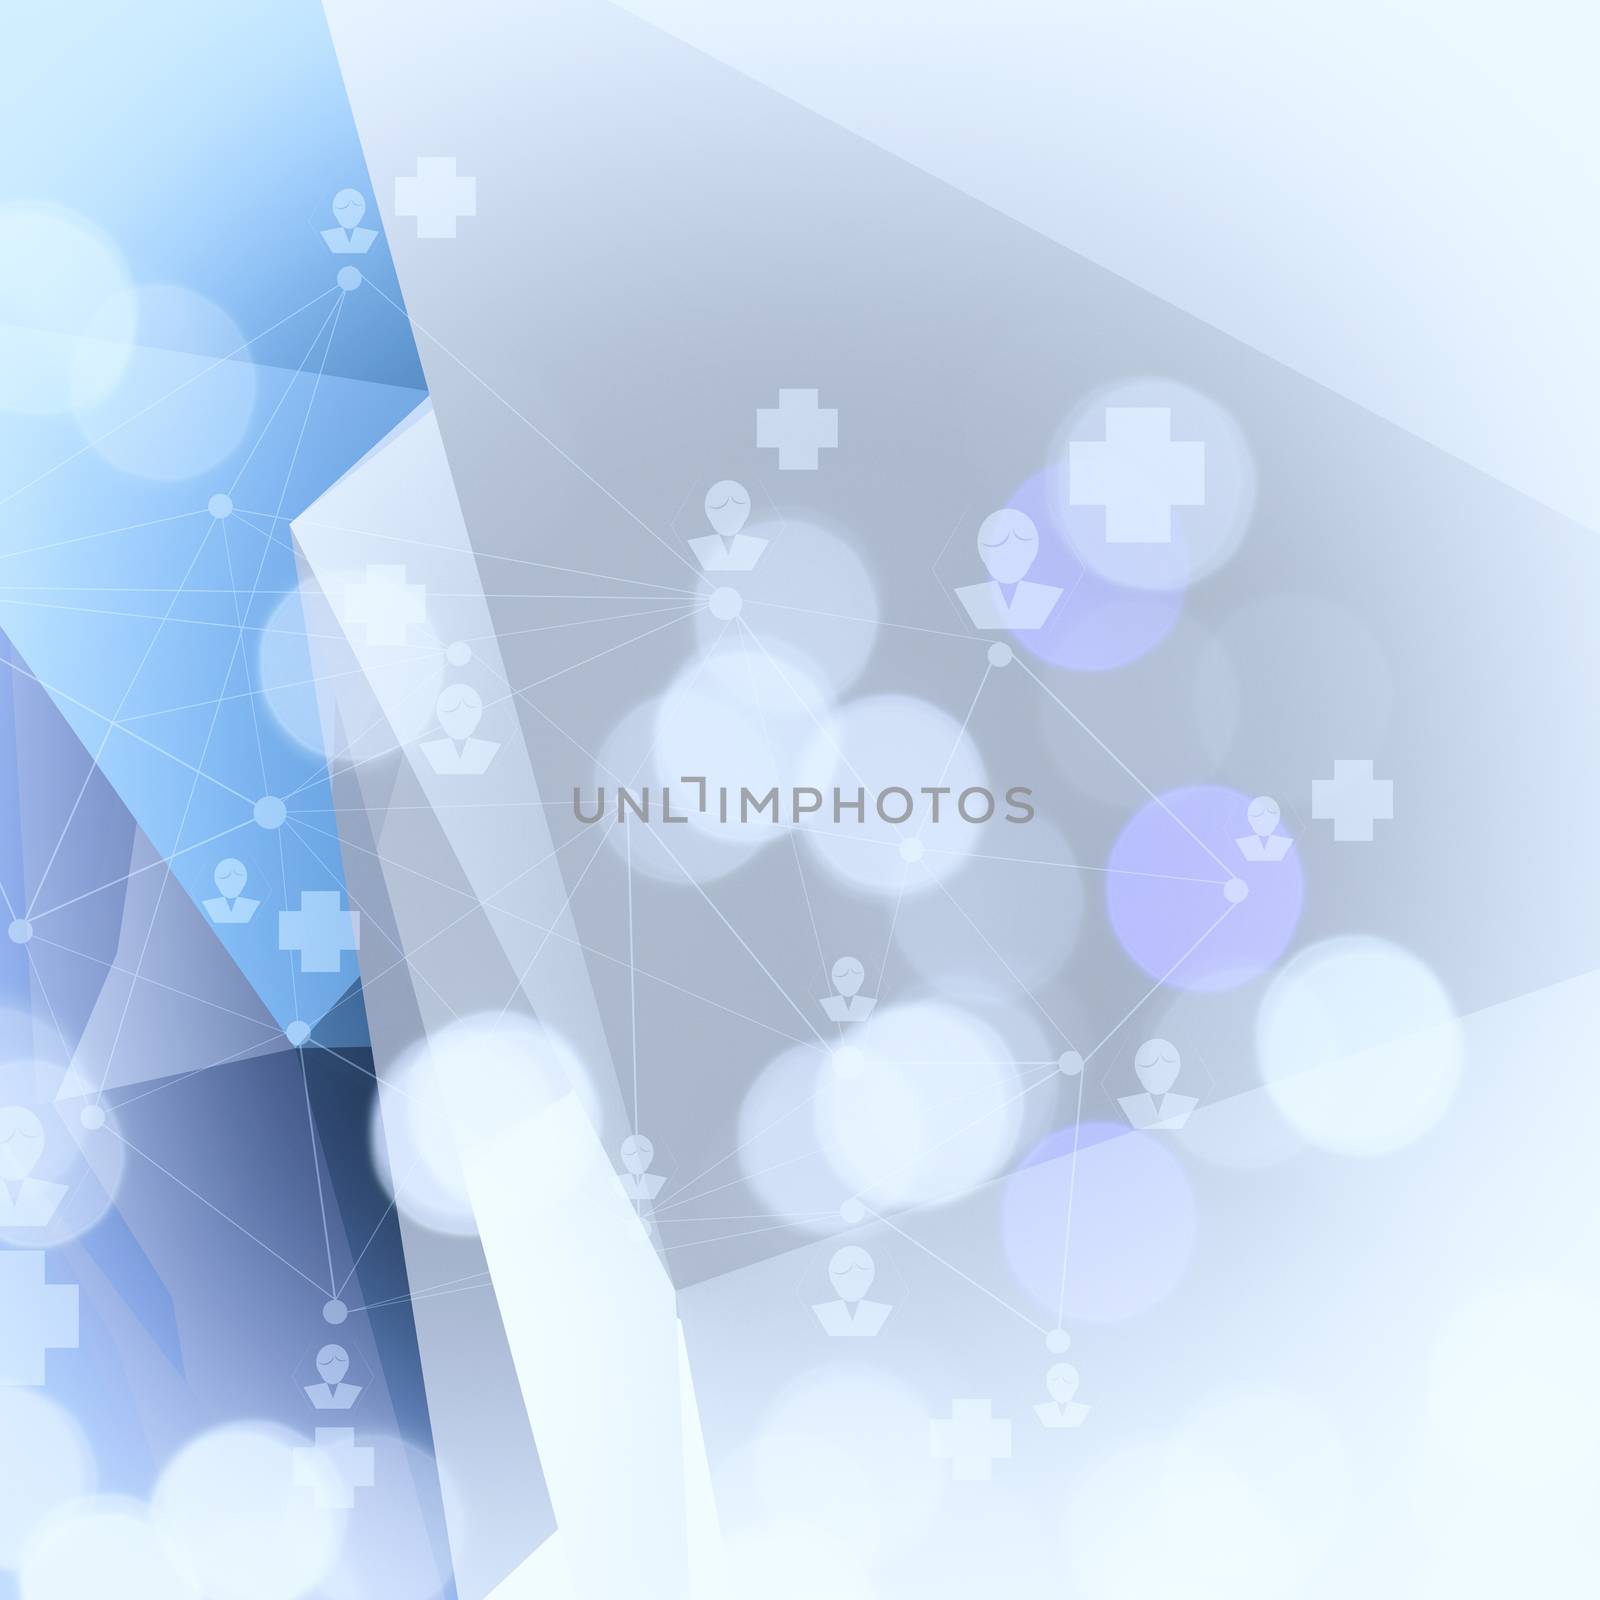 Abstract low poly geometric background